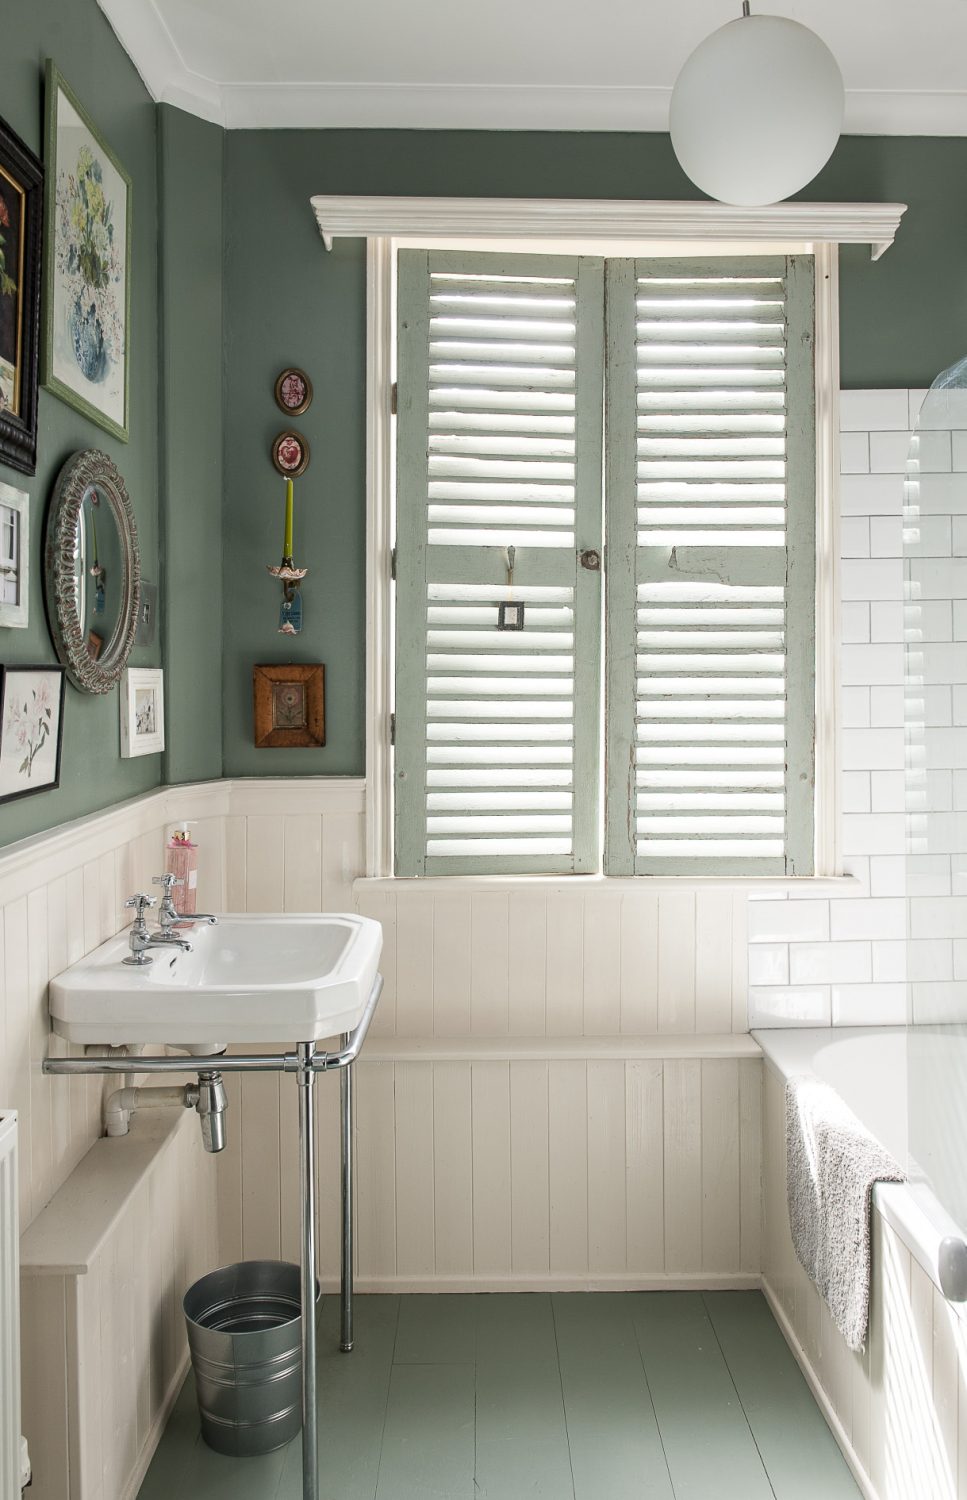 On the first floor, the family bathroom and loo are painted a mossy green and nautical blue, lined with off-white wood panelling